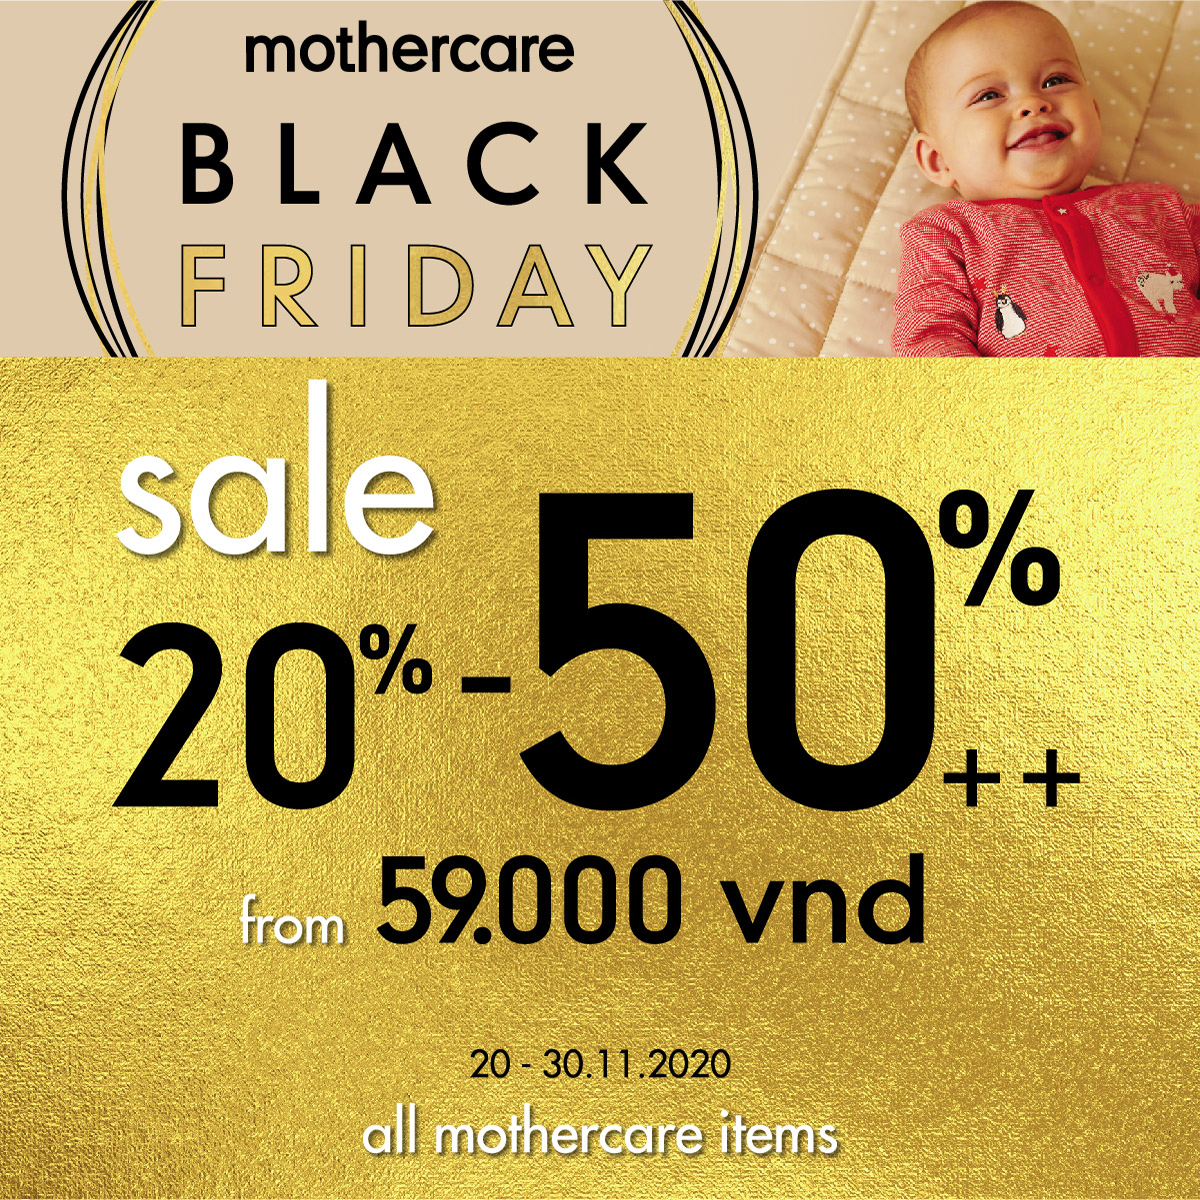 MOTHERCARE BLACK FRIDAY SALE ALL ITEMS FROM 59,000 VND